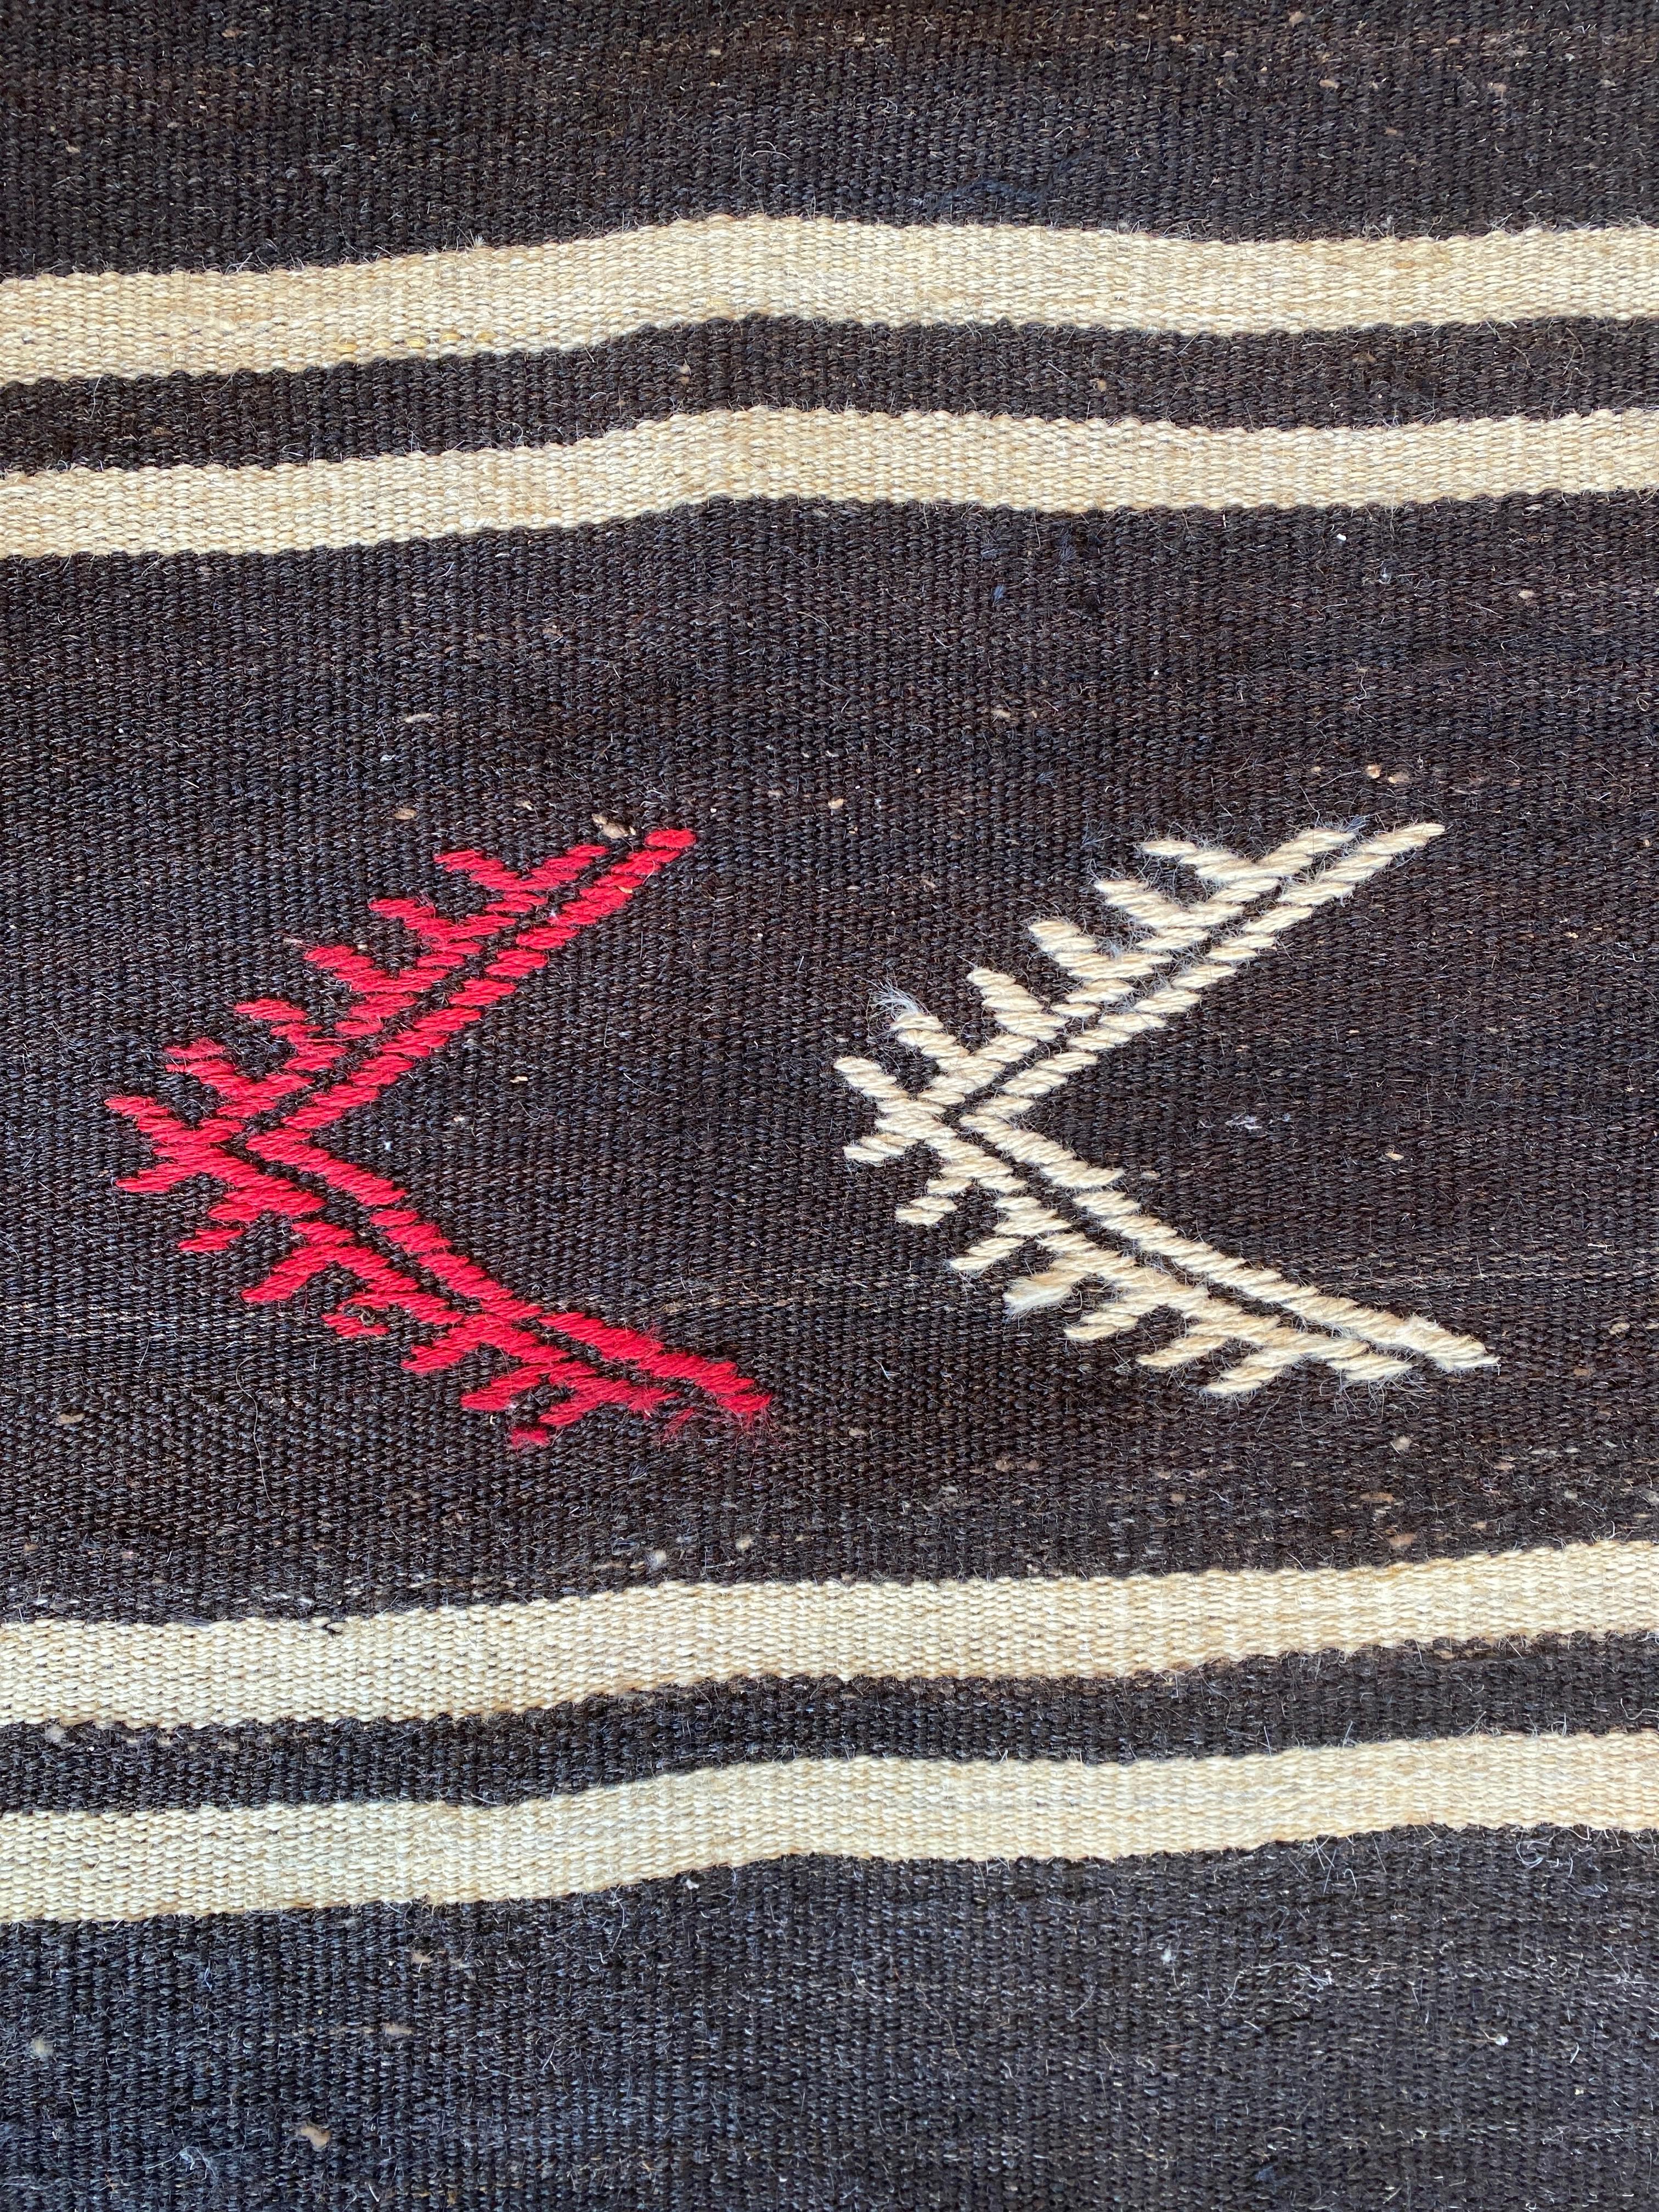 Vintage Turkish Kilim

Circa 1950

Flatweave, good condition. Dark charcoal brown, almost black with pale cream stripes and red, white and turquoise symbols. The hook and evil eye design symbolize protection.

Wear notes: none

Wear